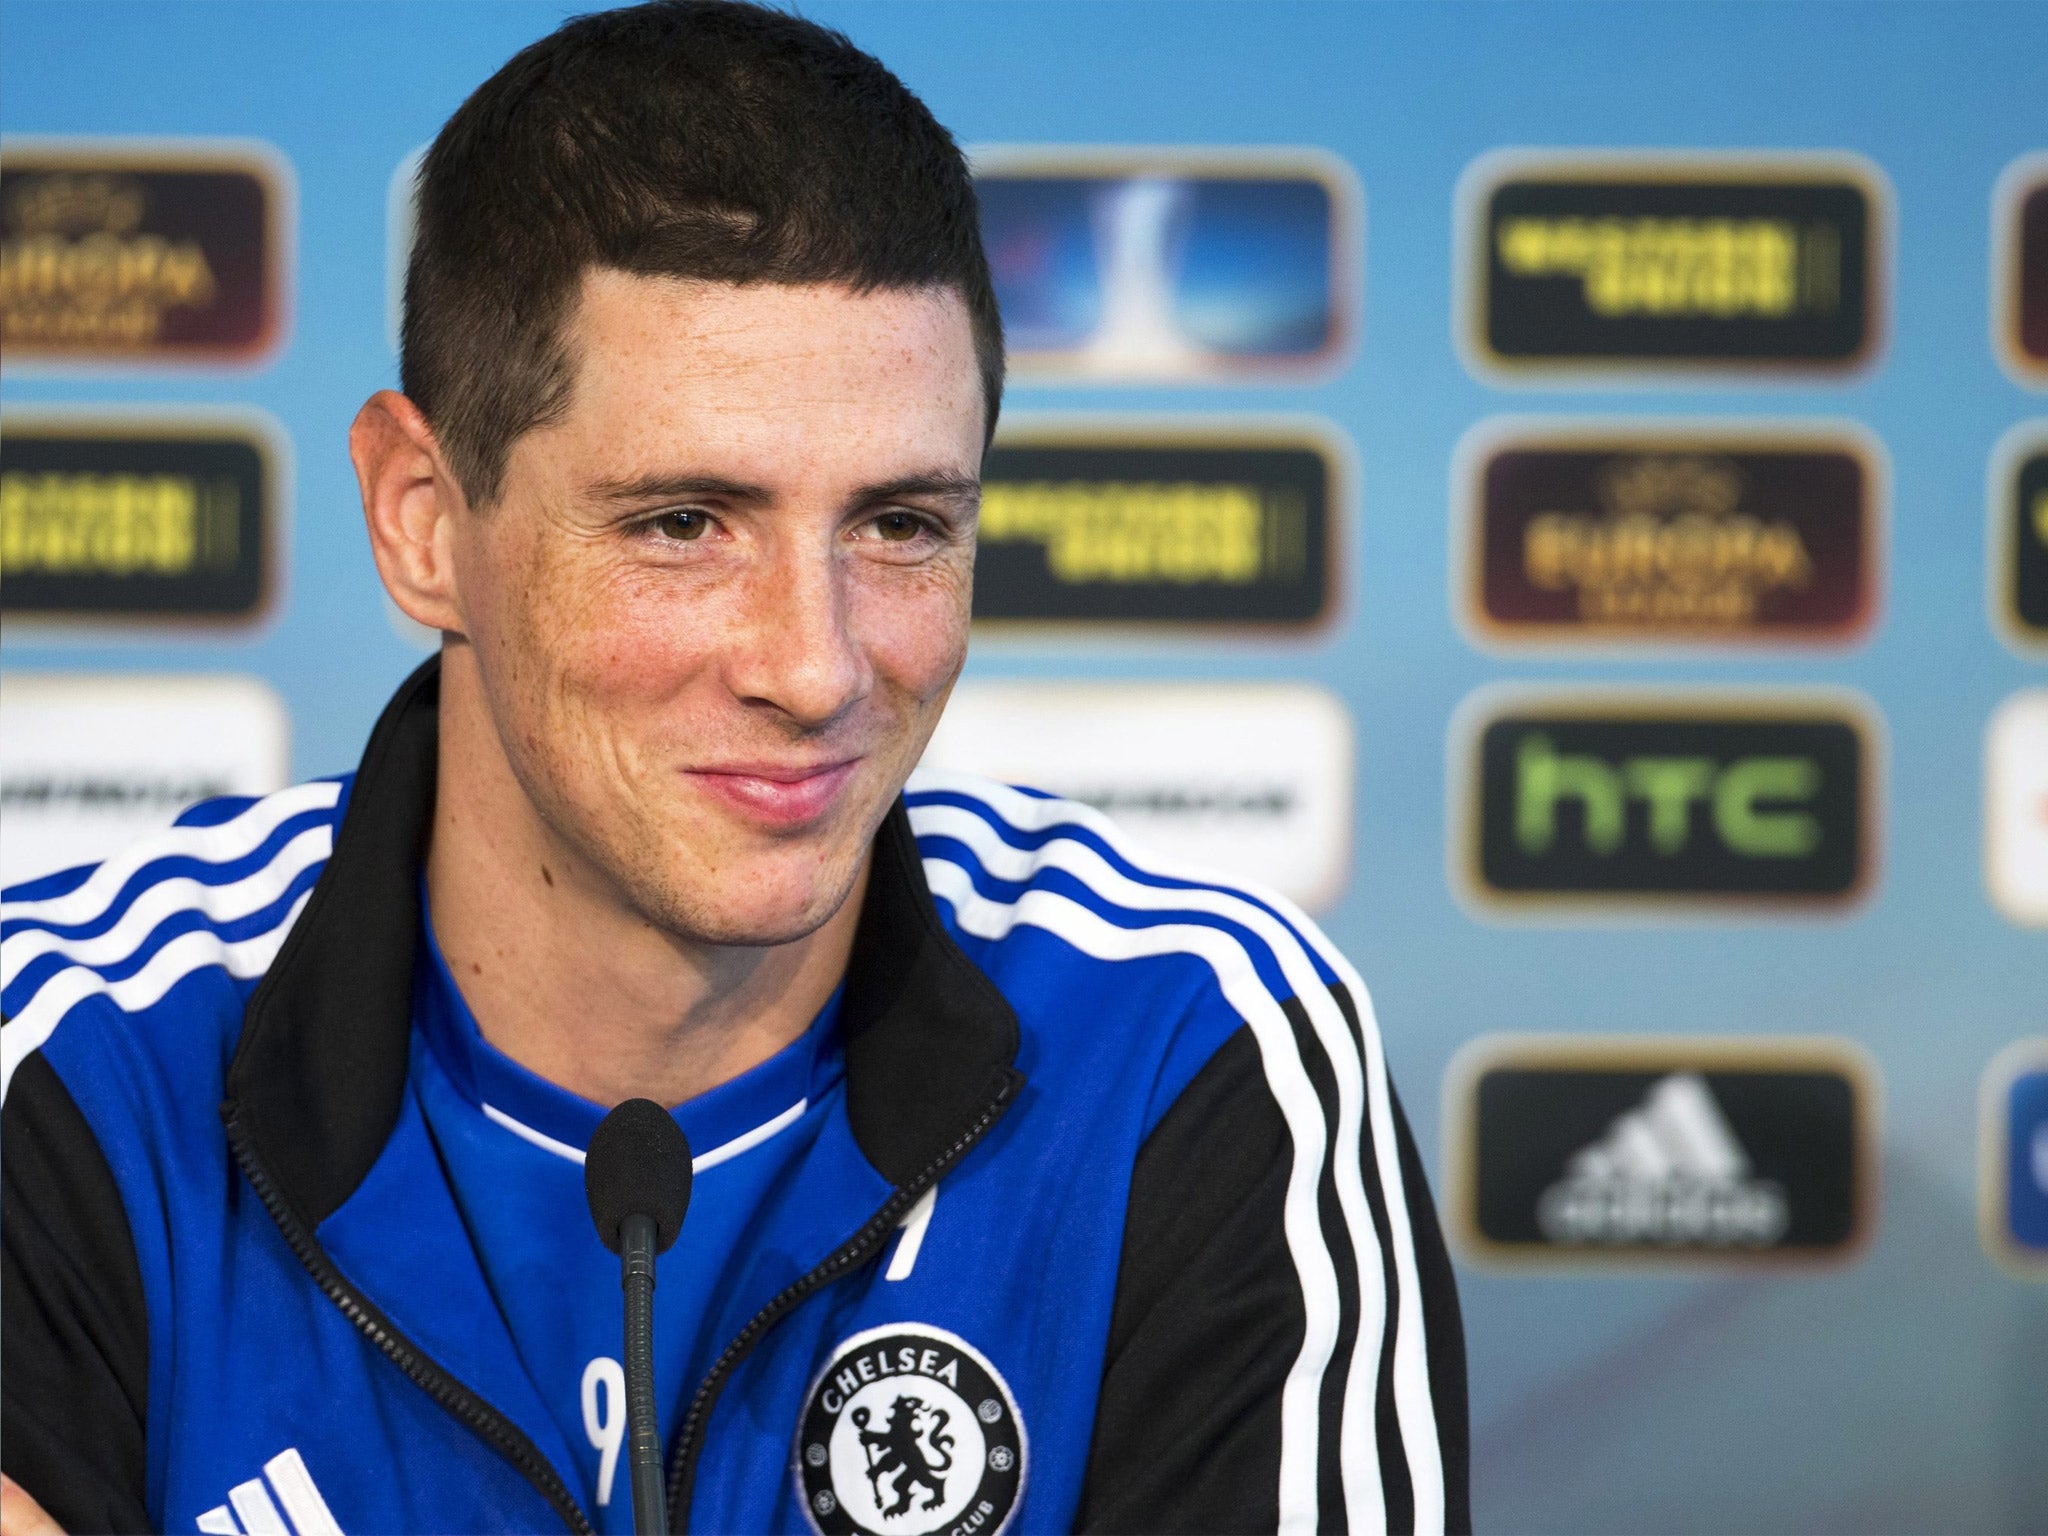 Chelsea striker Fernando Torres says he feels at home at the club